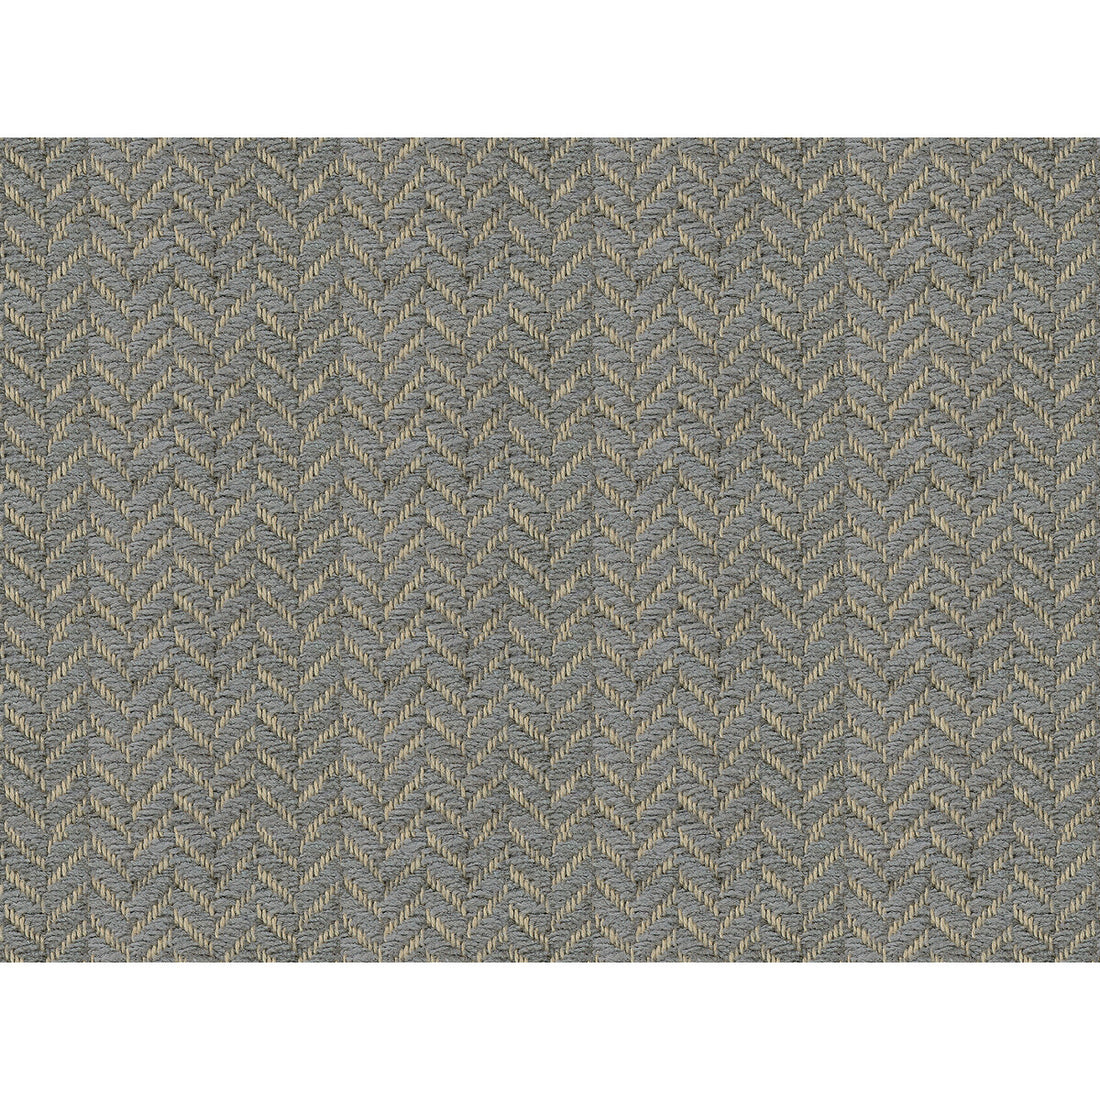 Mottaret Chenille fabric in grey color - pattern 8016111.11.0 - by Brunschwig &amp; Fils in the Chambery Textures collection